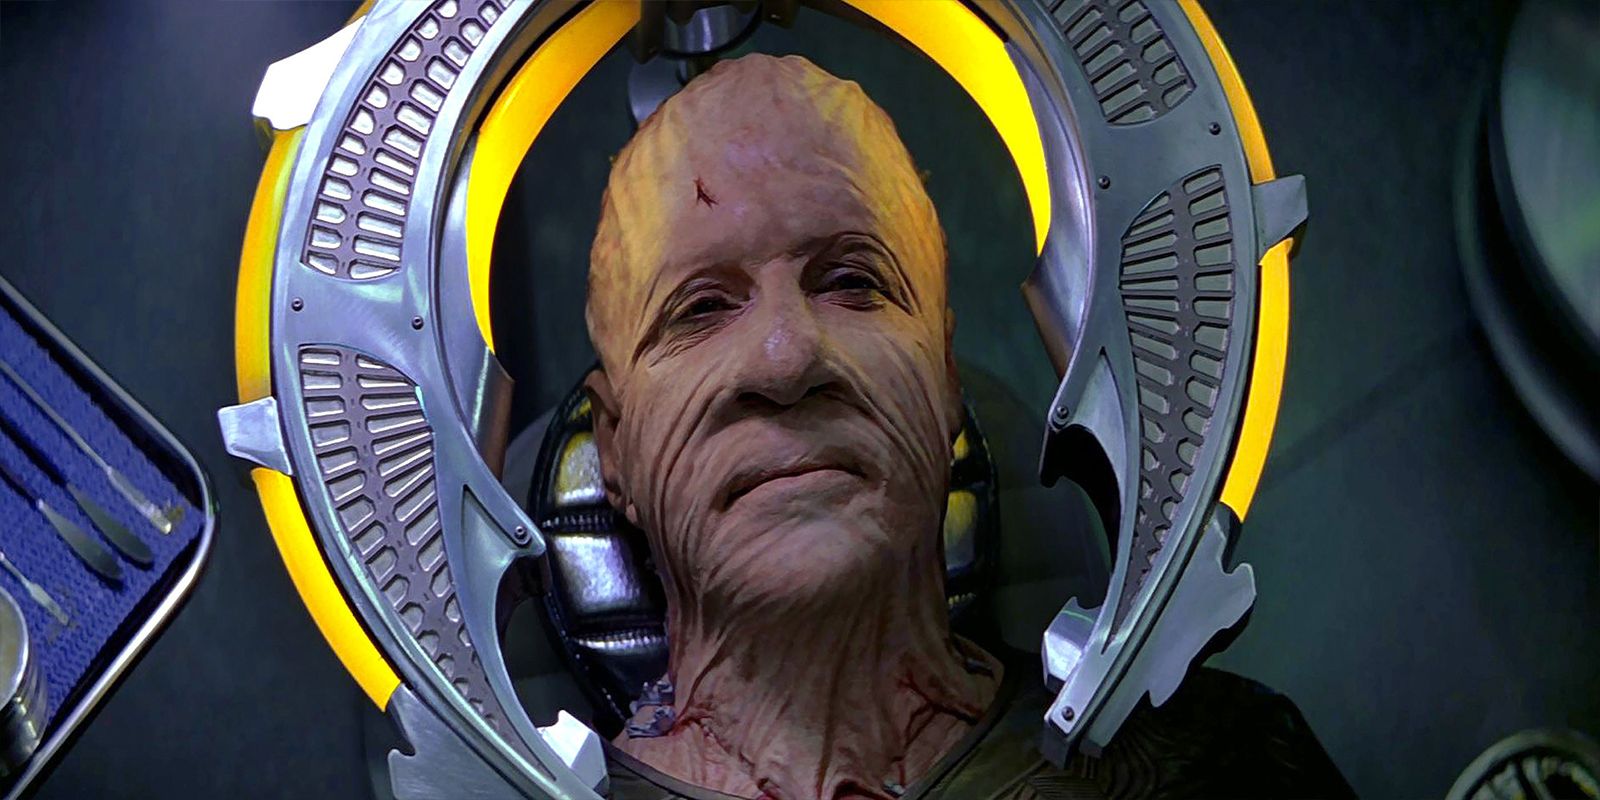 The Son'a leader, Ru'afo, gets a face-lift in Star Trek: Insurrection. 